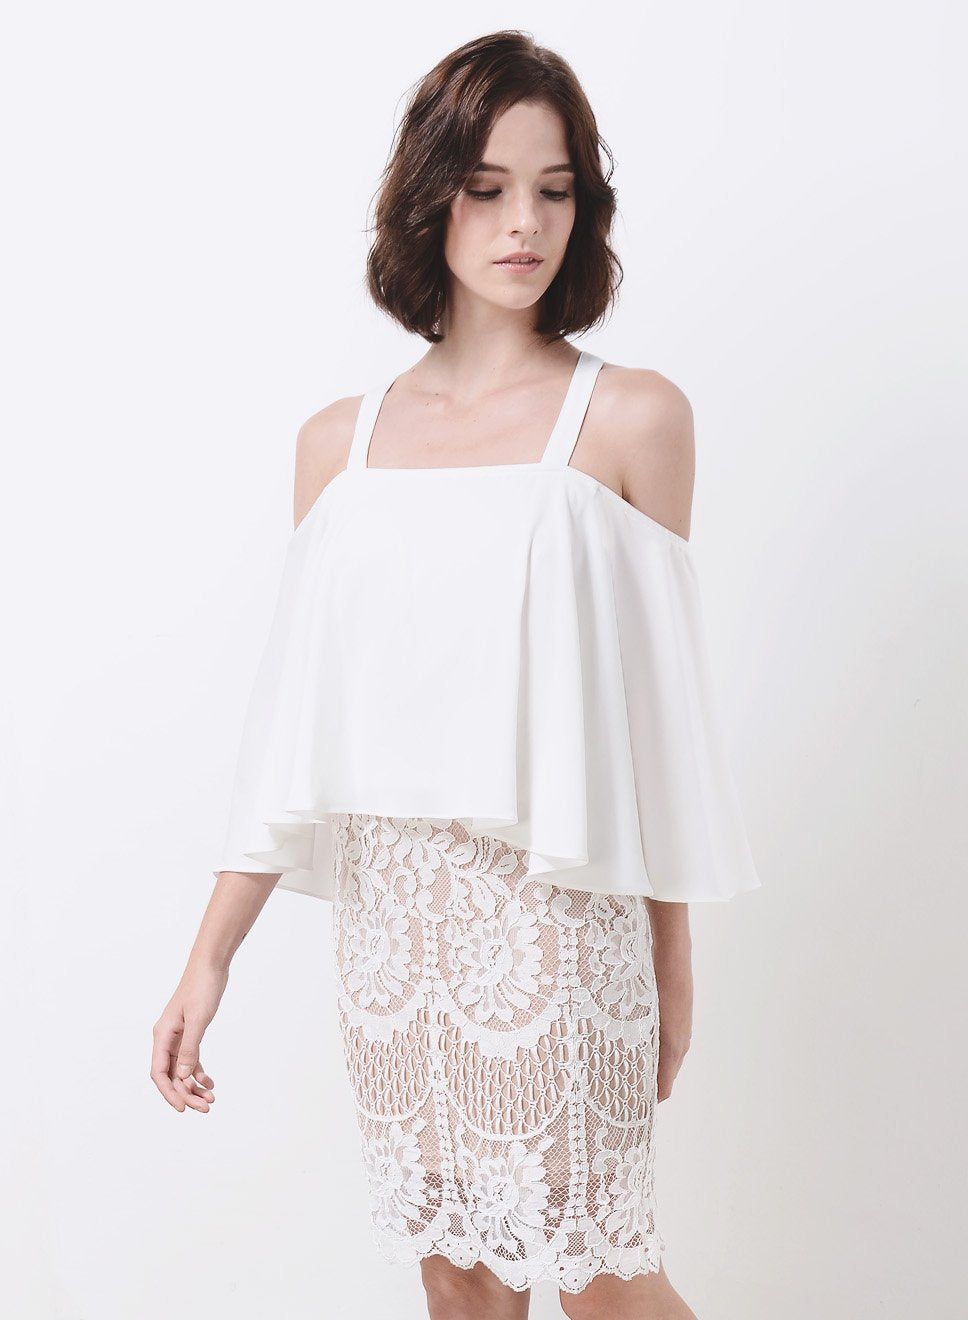 WAVE Cold Shoulder Flare Top (White) - And Well Dressed